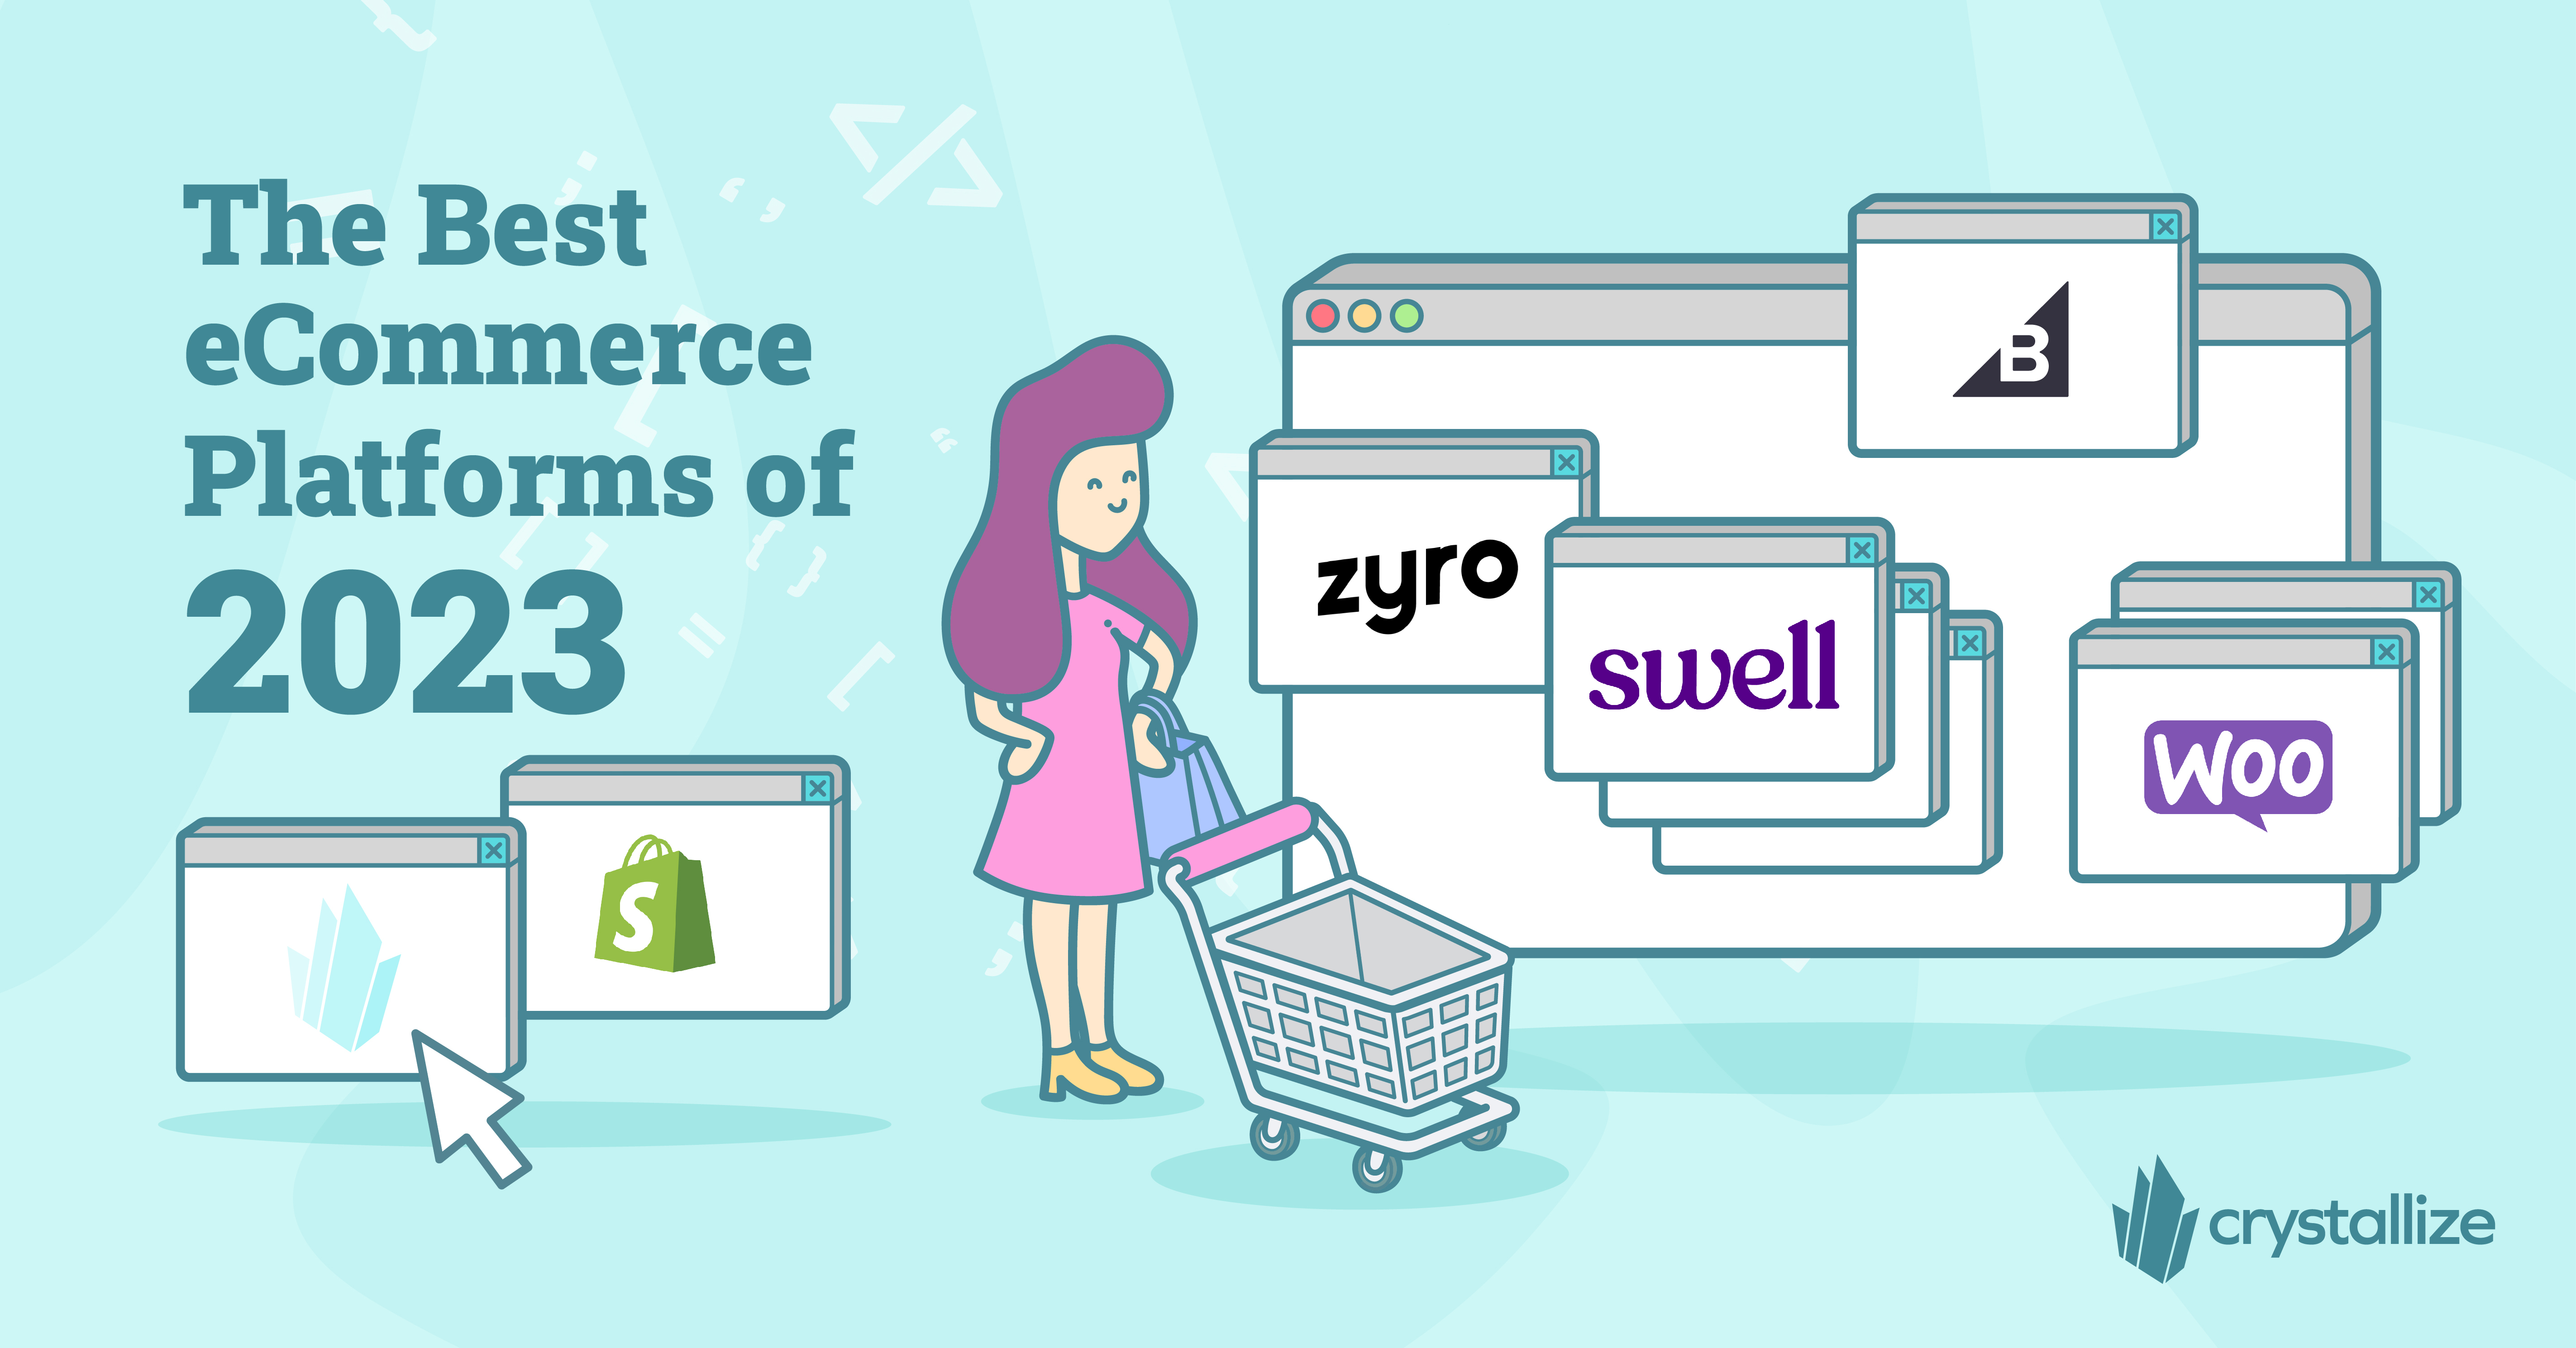 The Best eCommerce Platforms of 2023